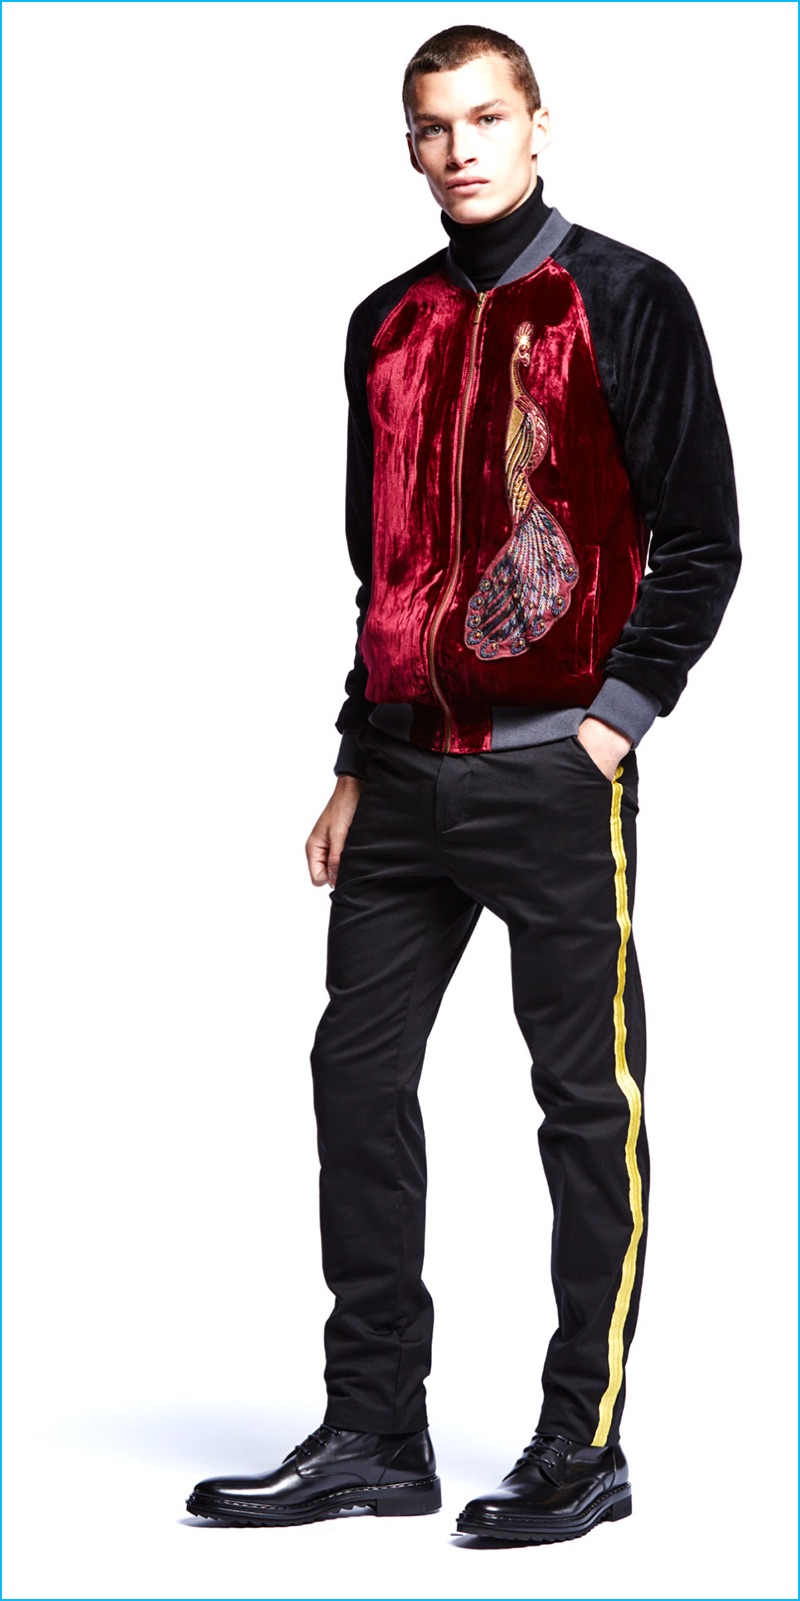 Louis Mayhew wears Laboratory embroidered peacock velvet jacket and track pants with metallic trim.